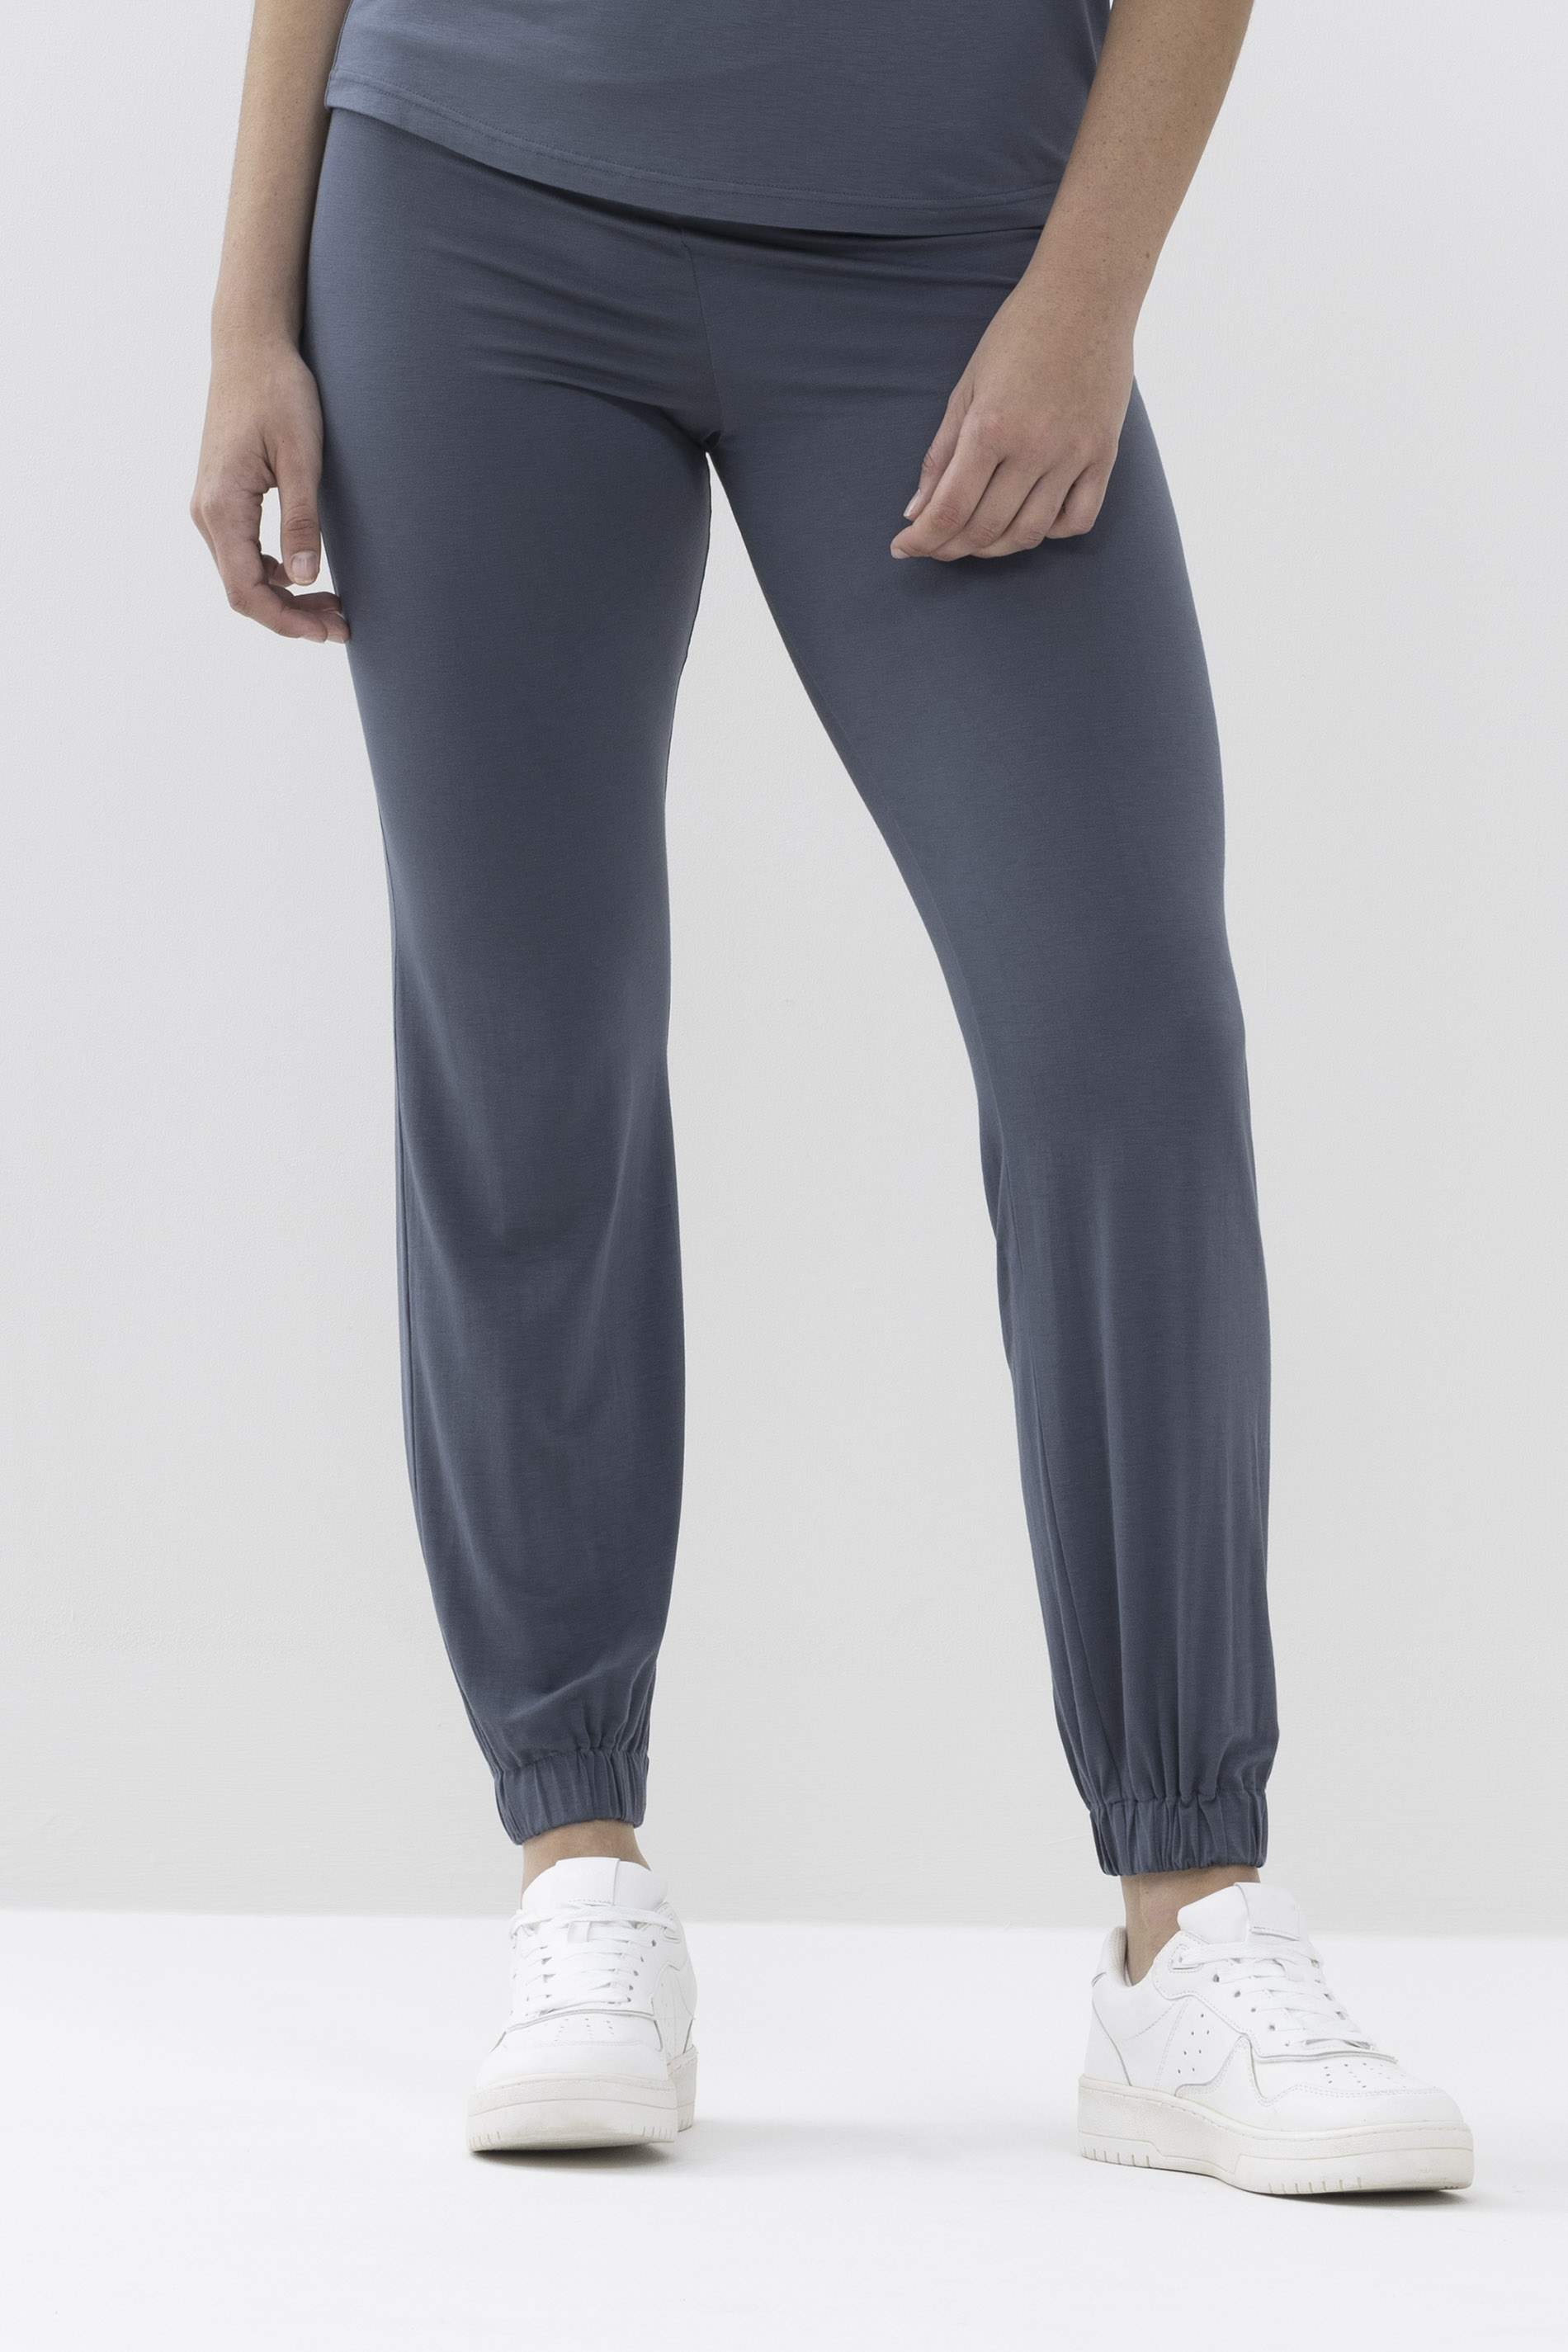 Yoga pants ankle-length Carbon Serie Breathable Front View | mey®